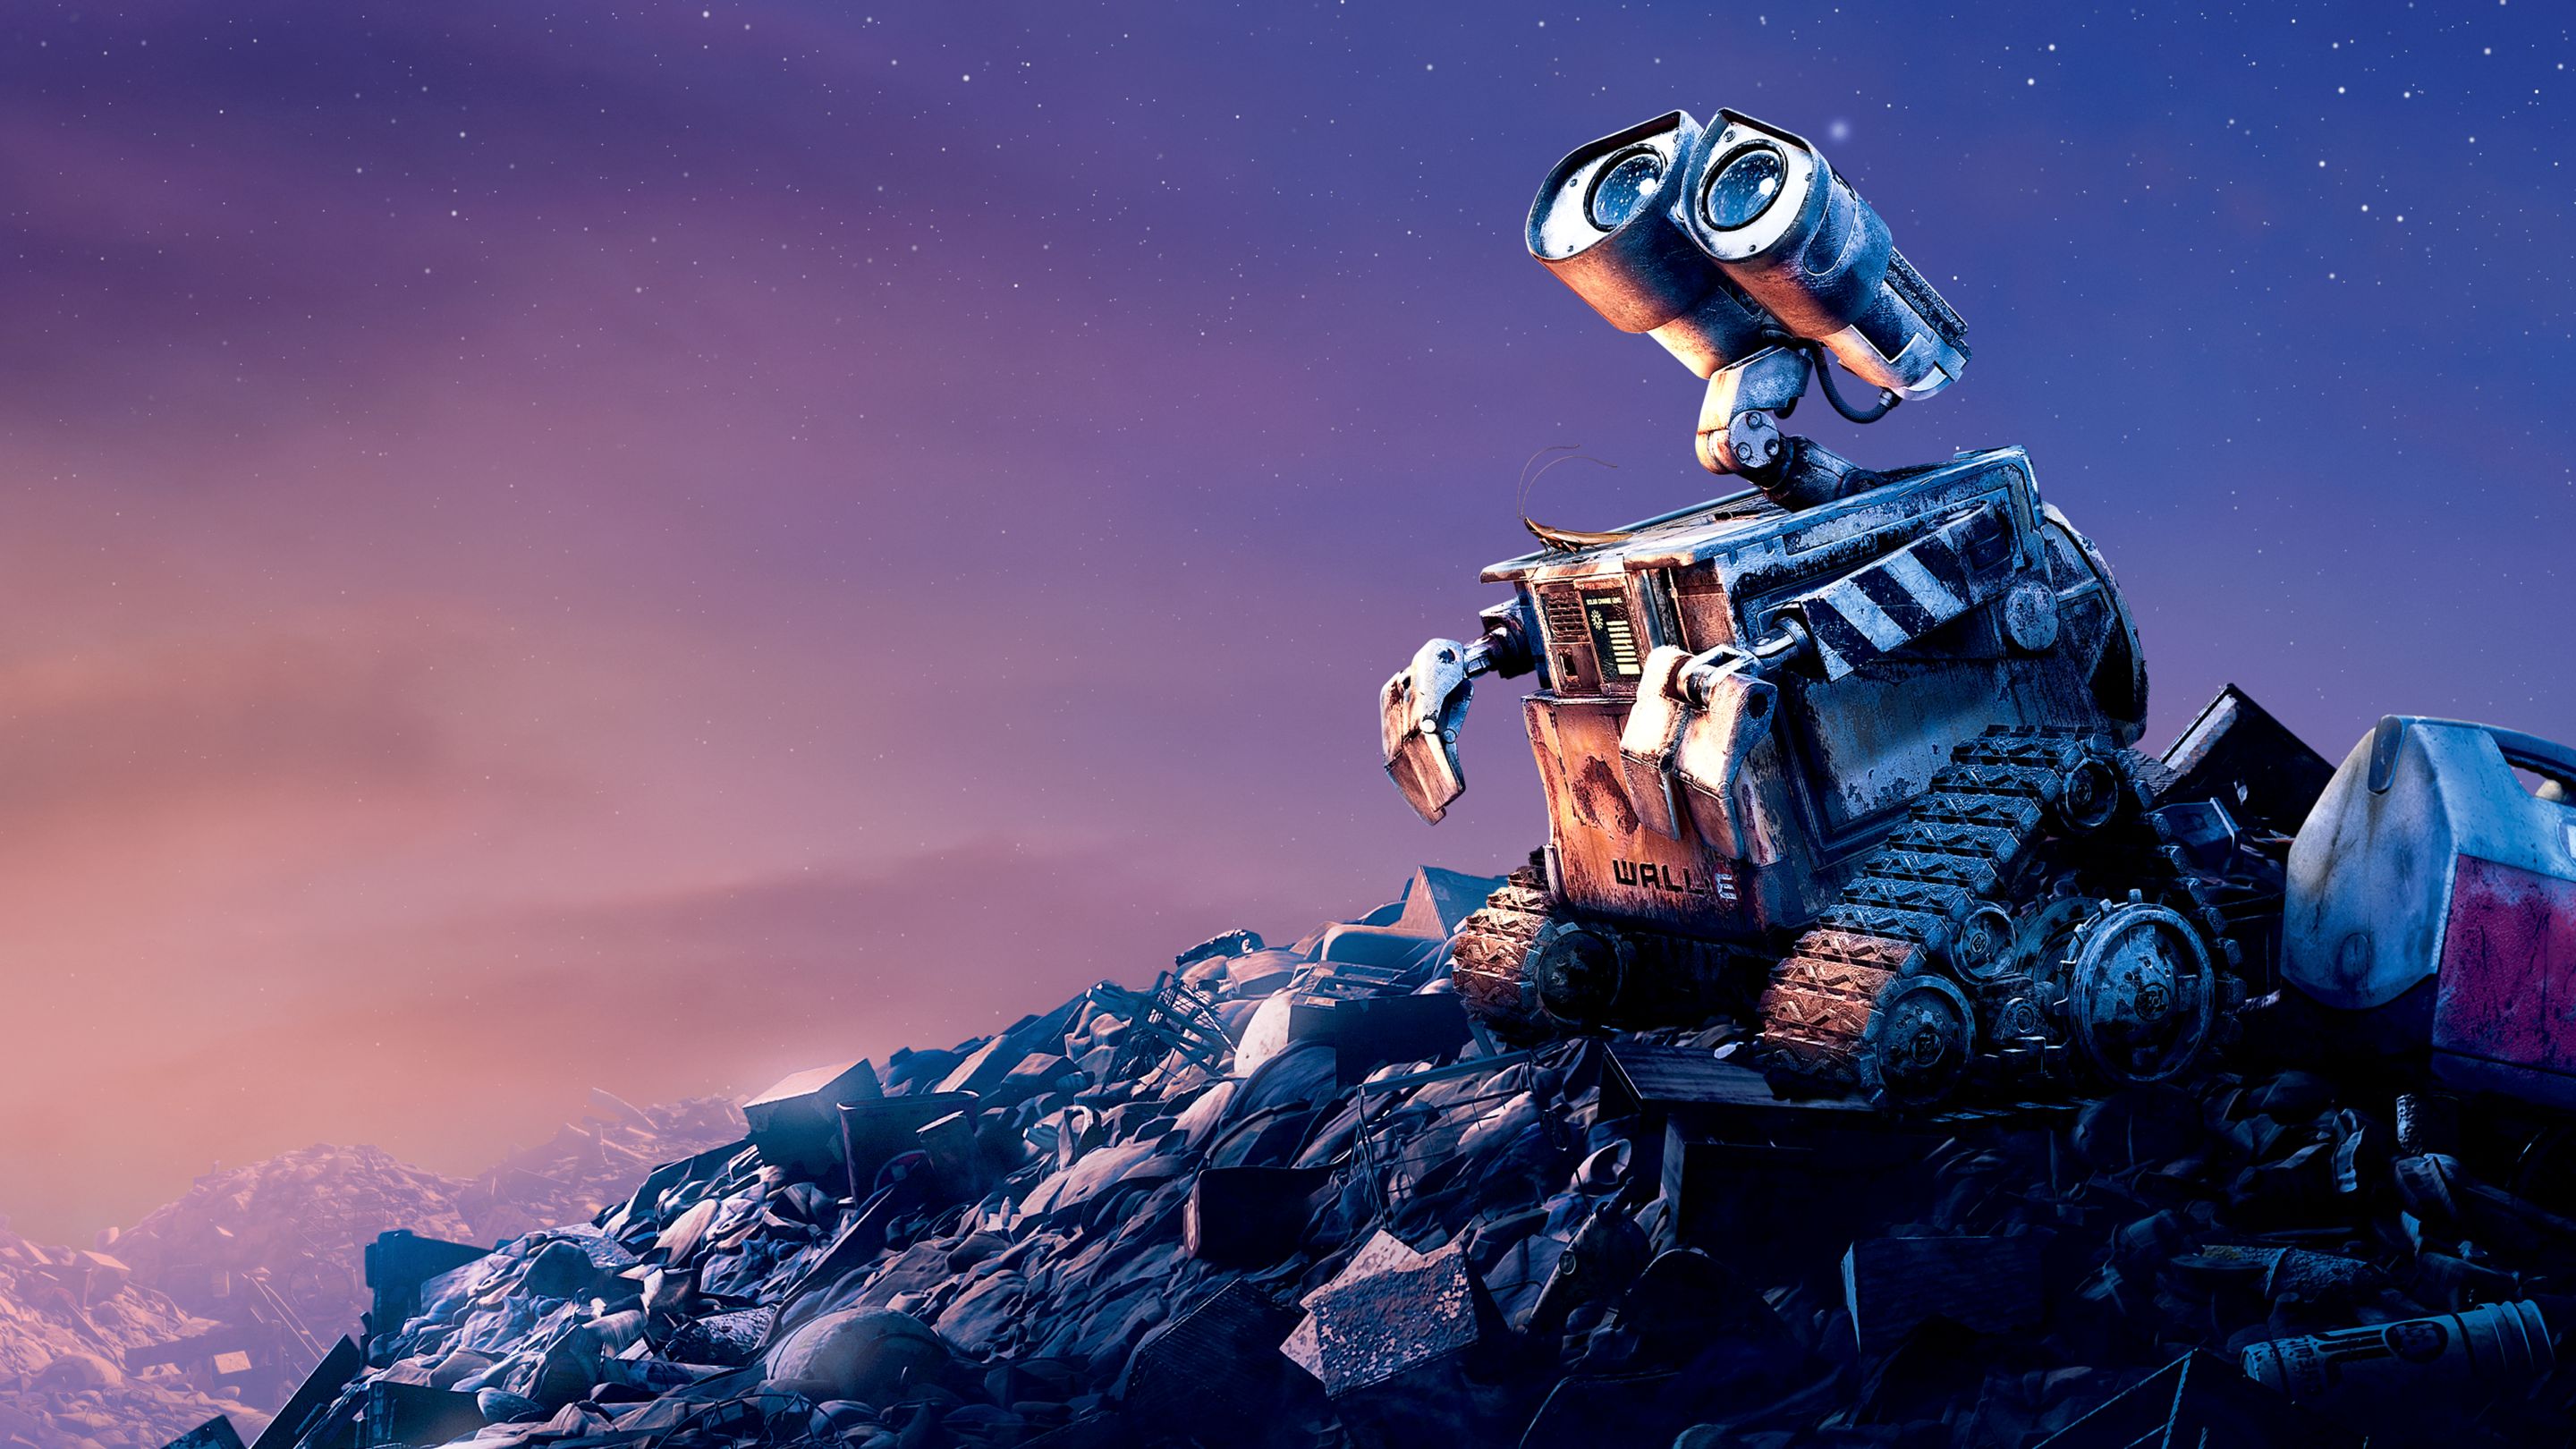 Why WALL-E Perfectly Demonstrates the Beauty of Life – The Art of Vibing